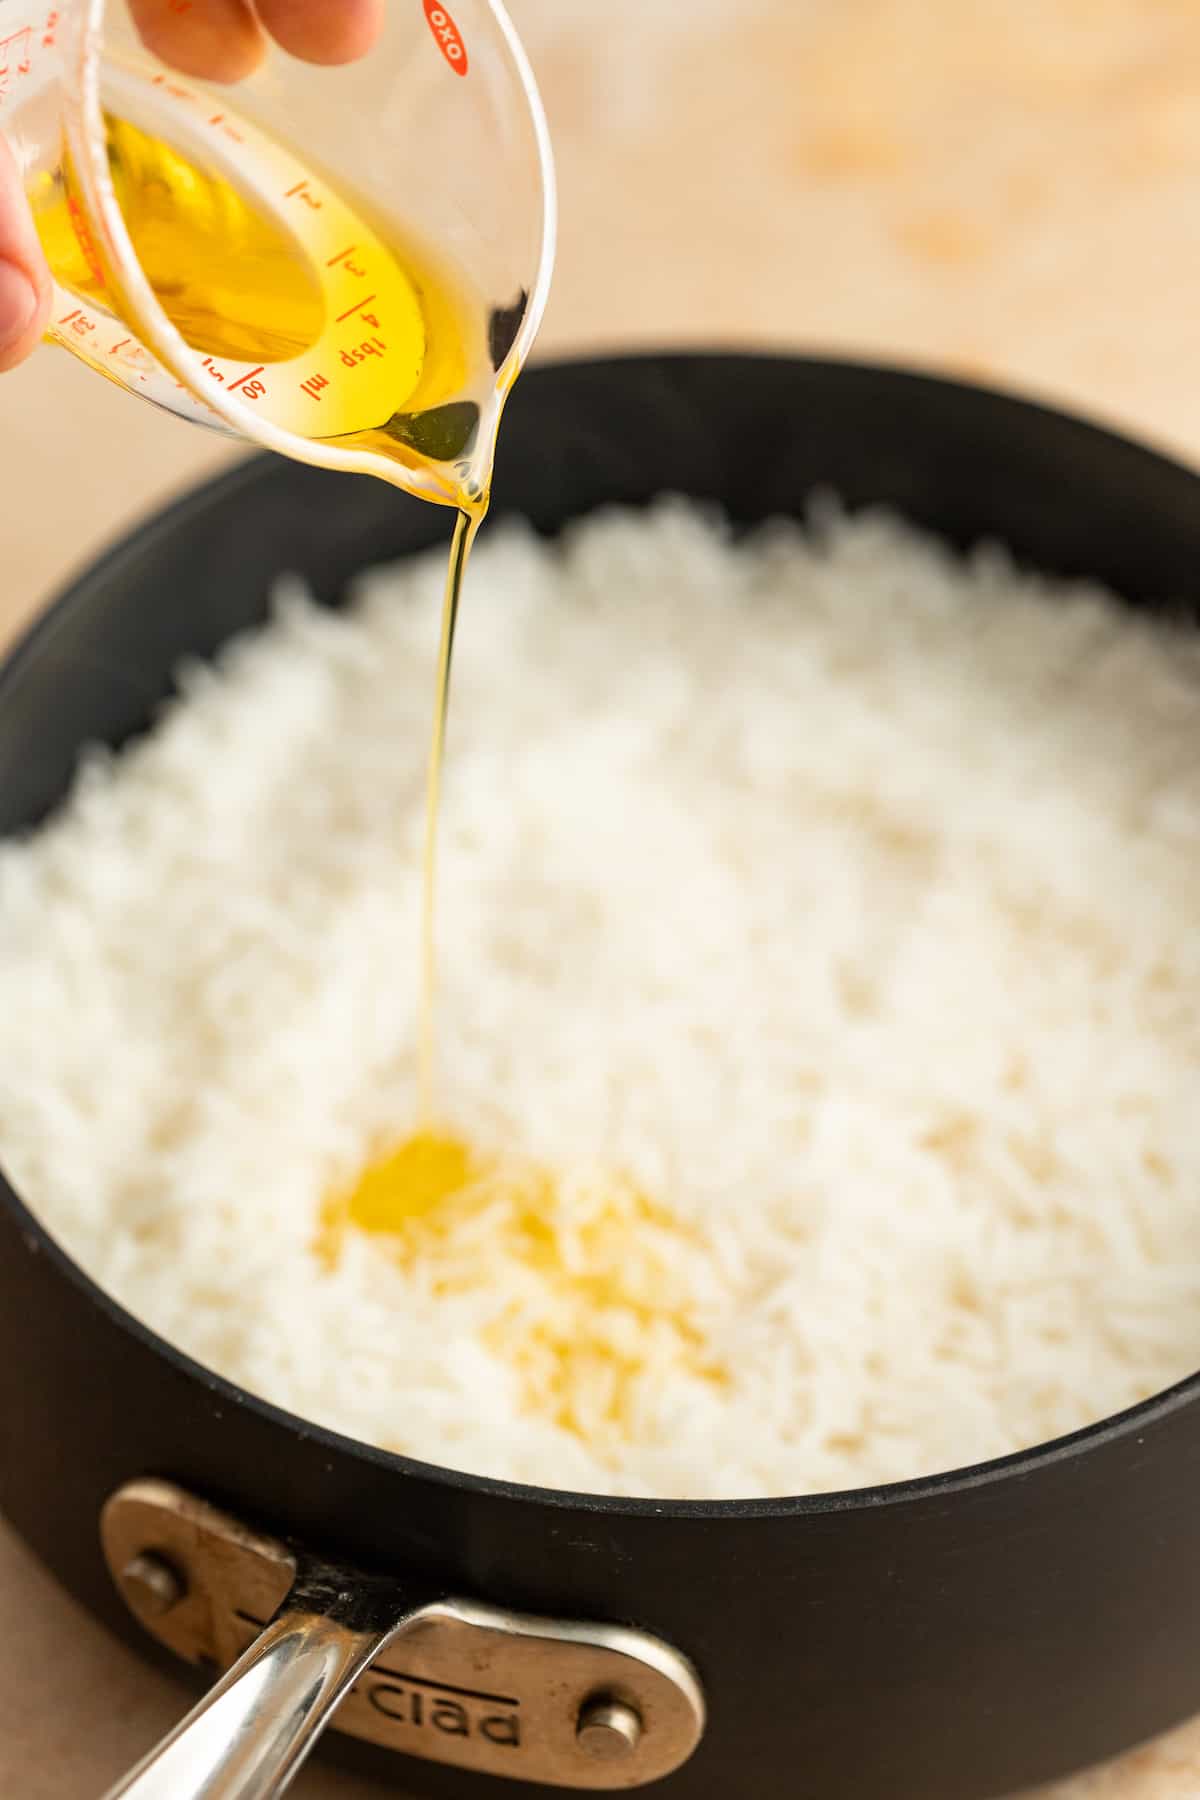 Pouring in the ghee.